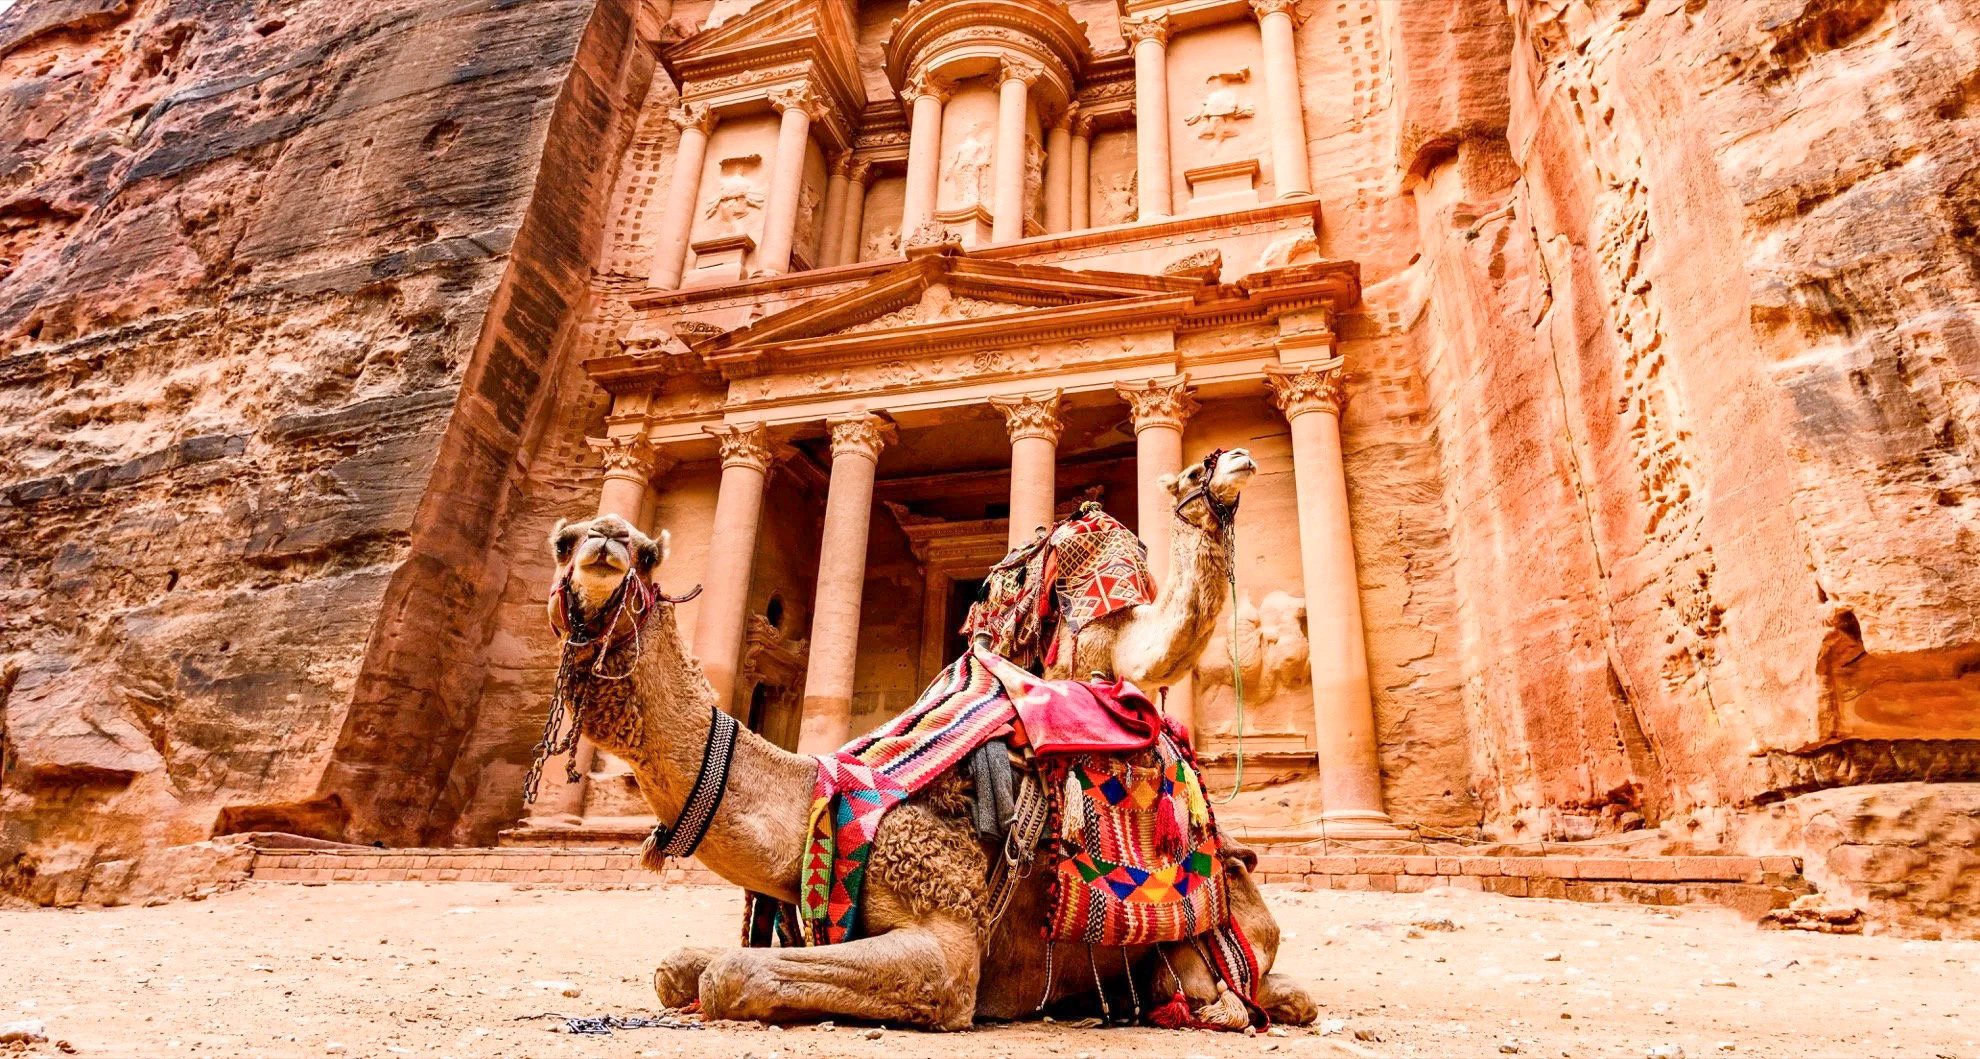 From Israel to PETRA